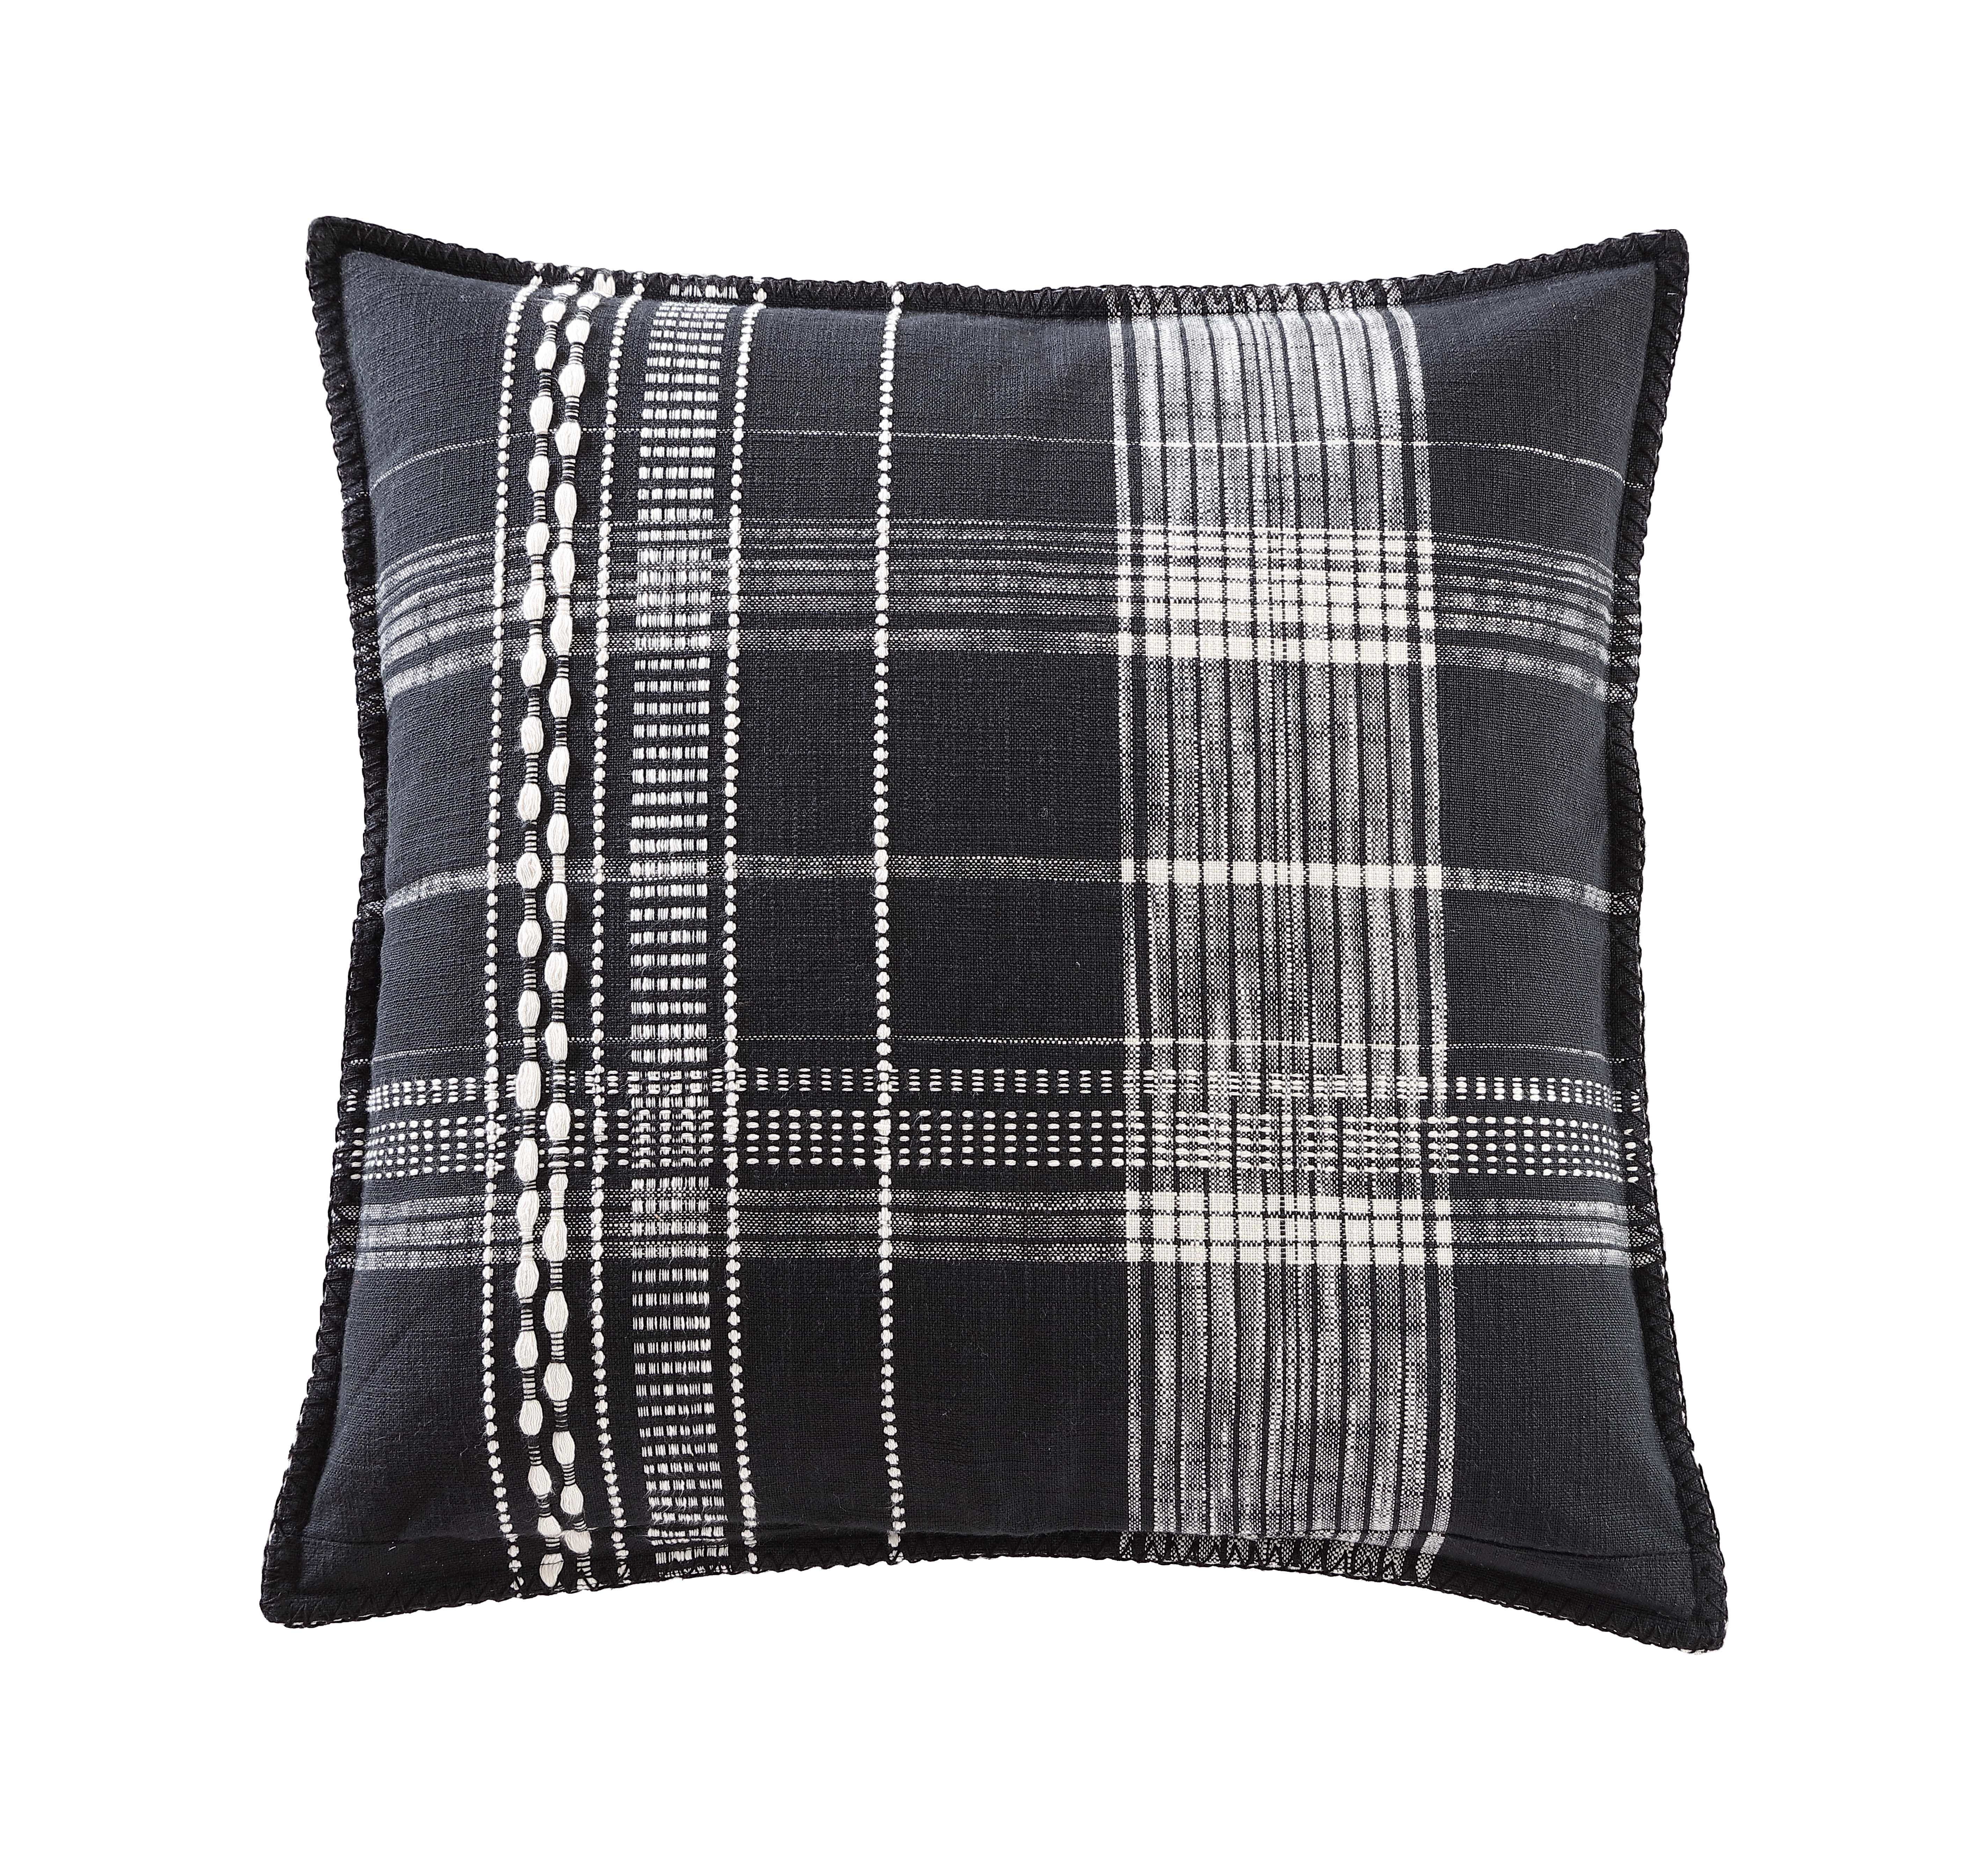 24x24x5 Better Homes & Gardens Yarn Dyed Floor Cushion Black and White Gingham